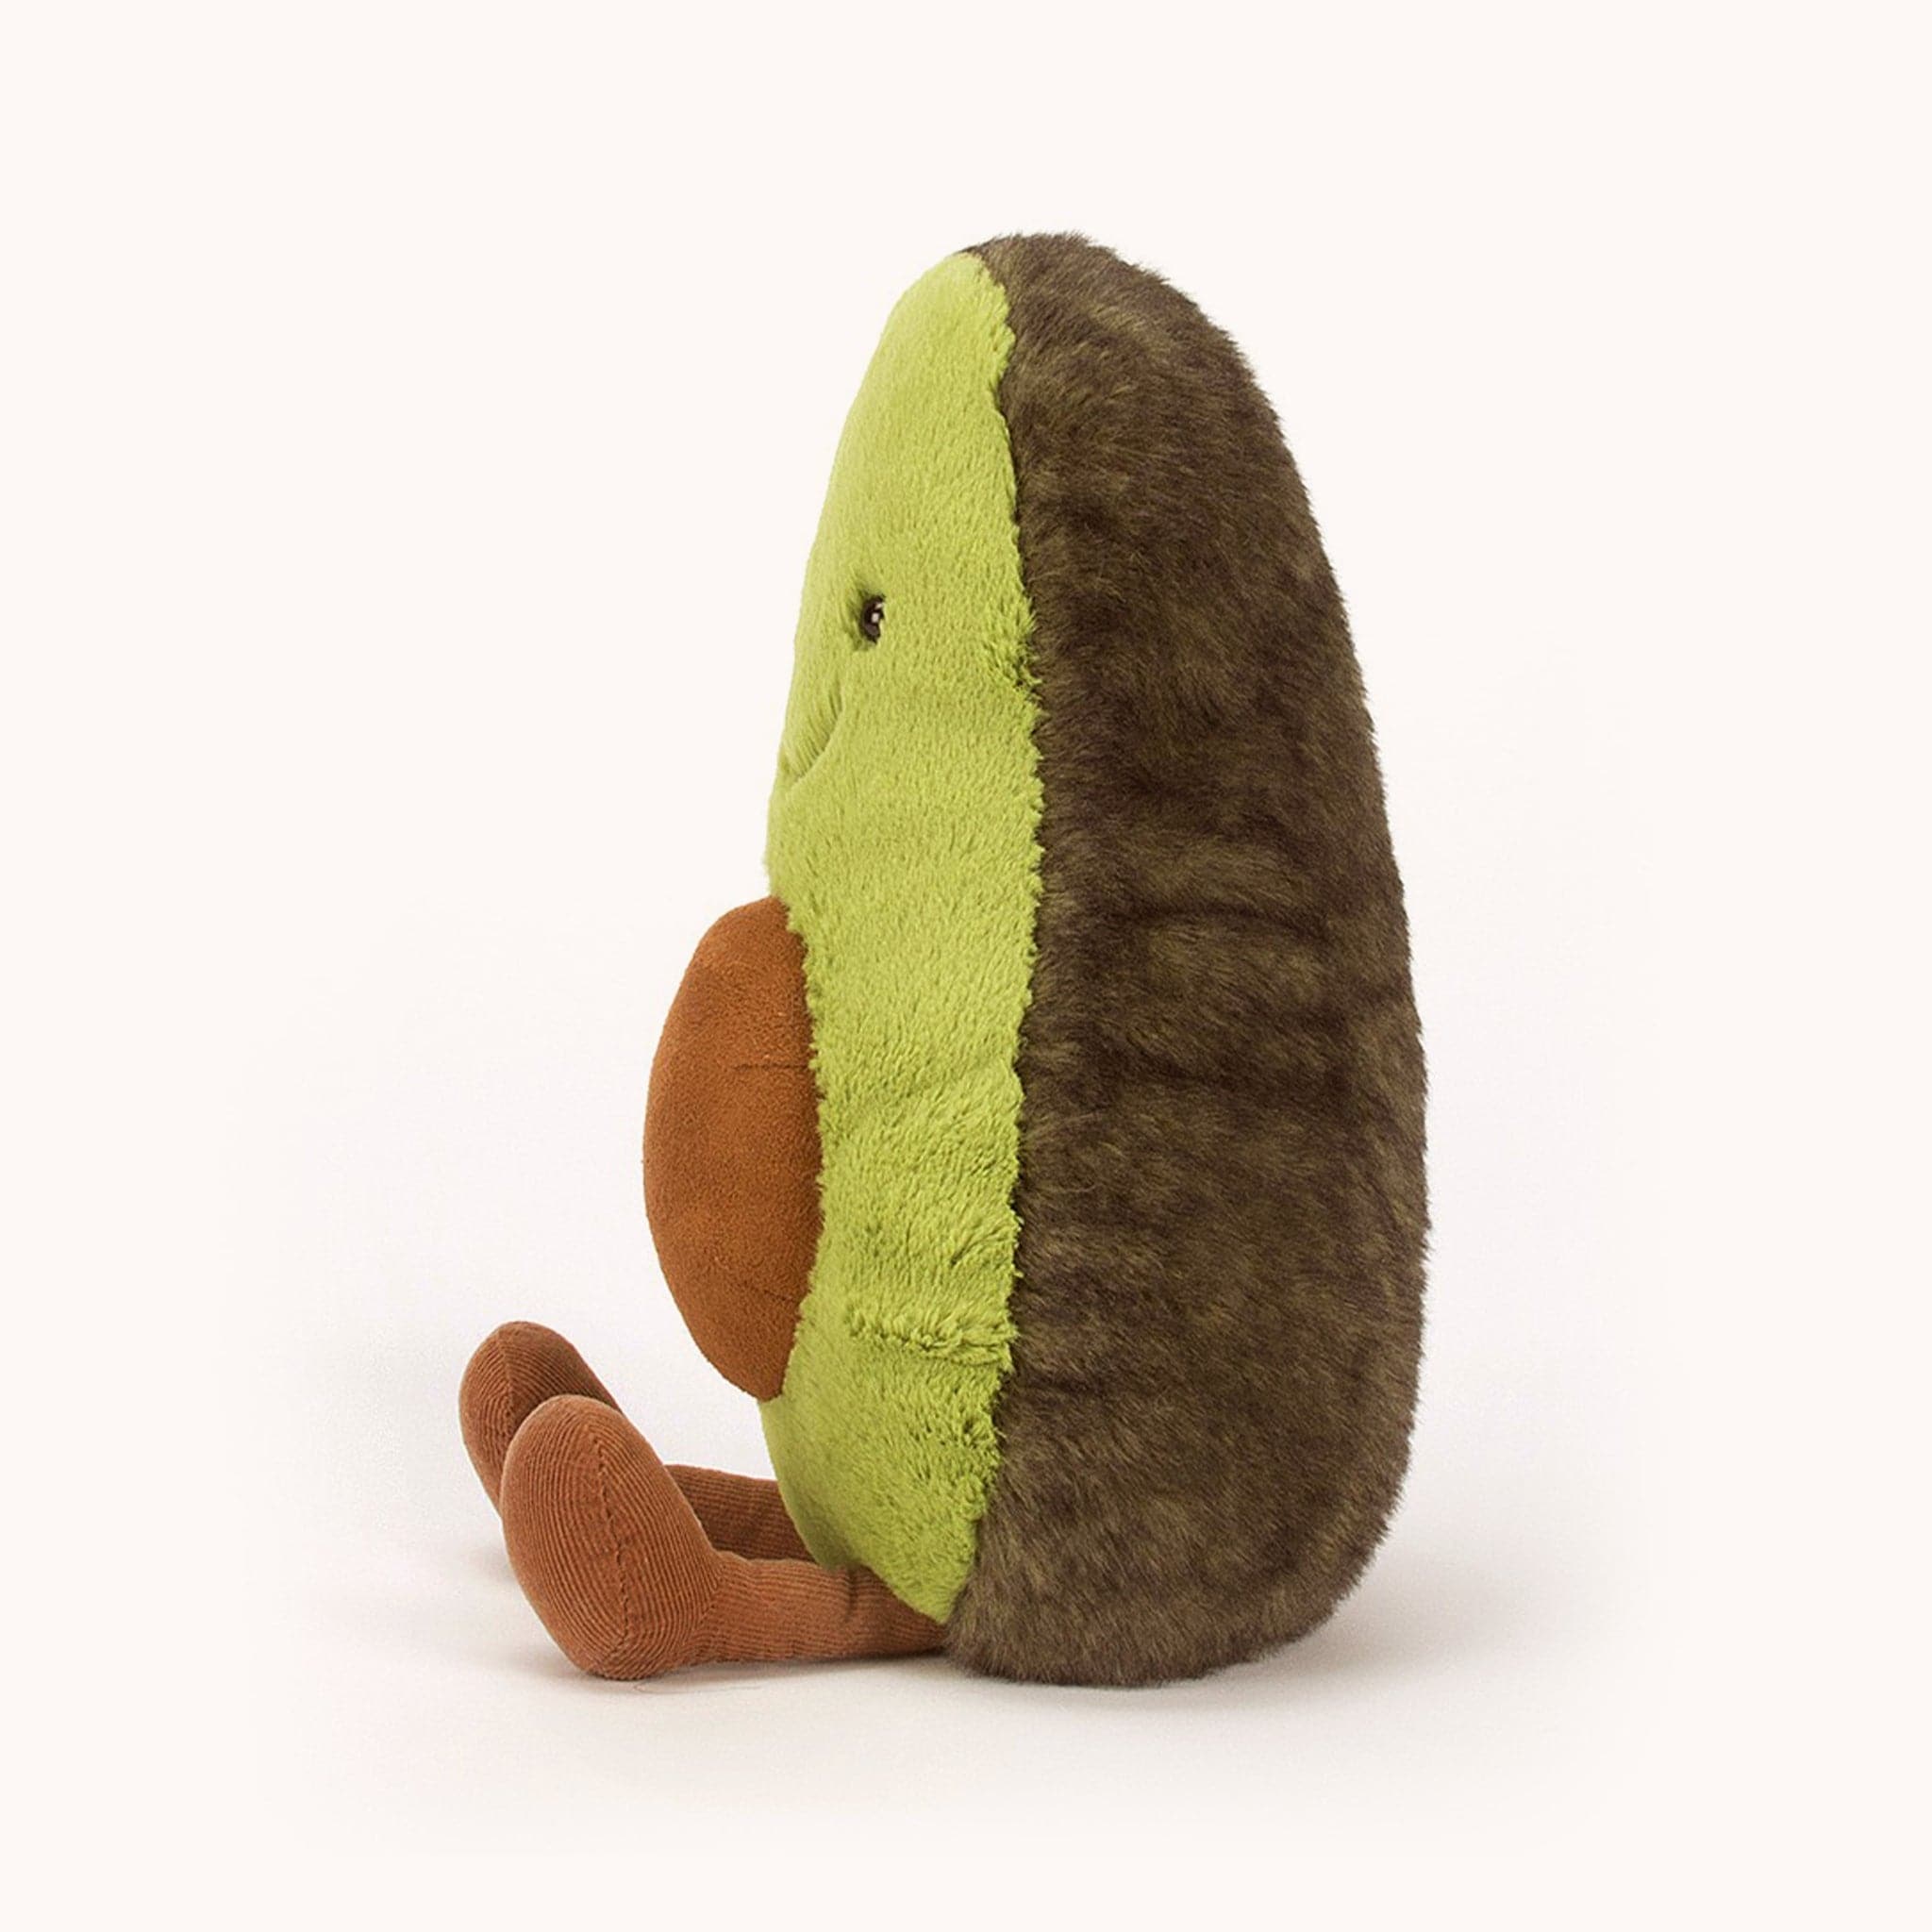 A sweet stuff little green avocado with a friendly smile and cord legs. This avocados skin is dark green and had a light green color for the inside. Showing on its tummy is a little brown avocado seed.